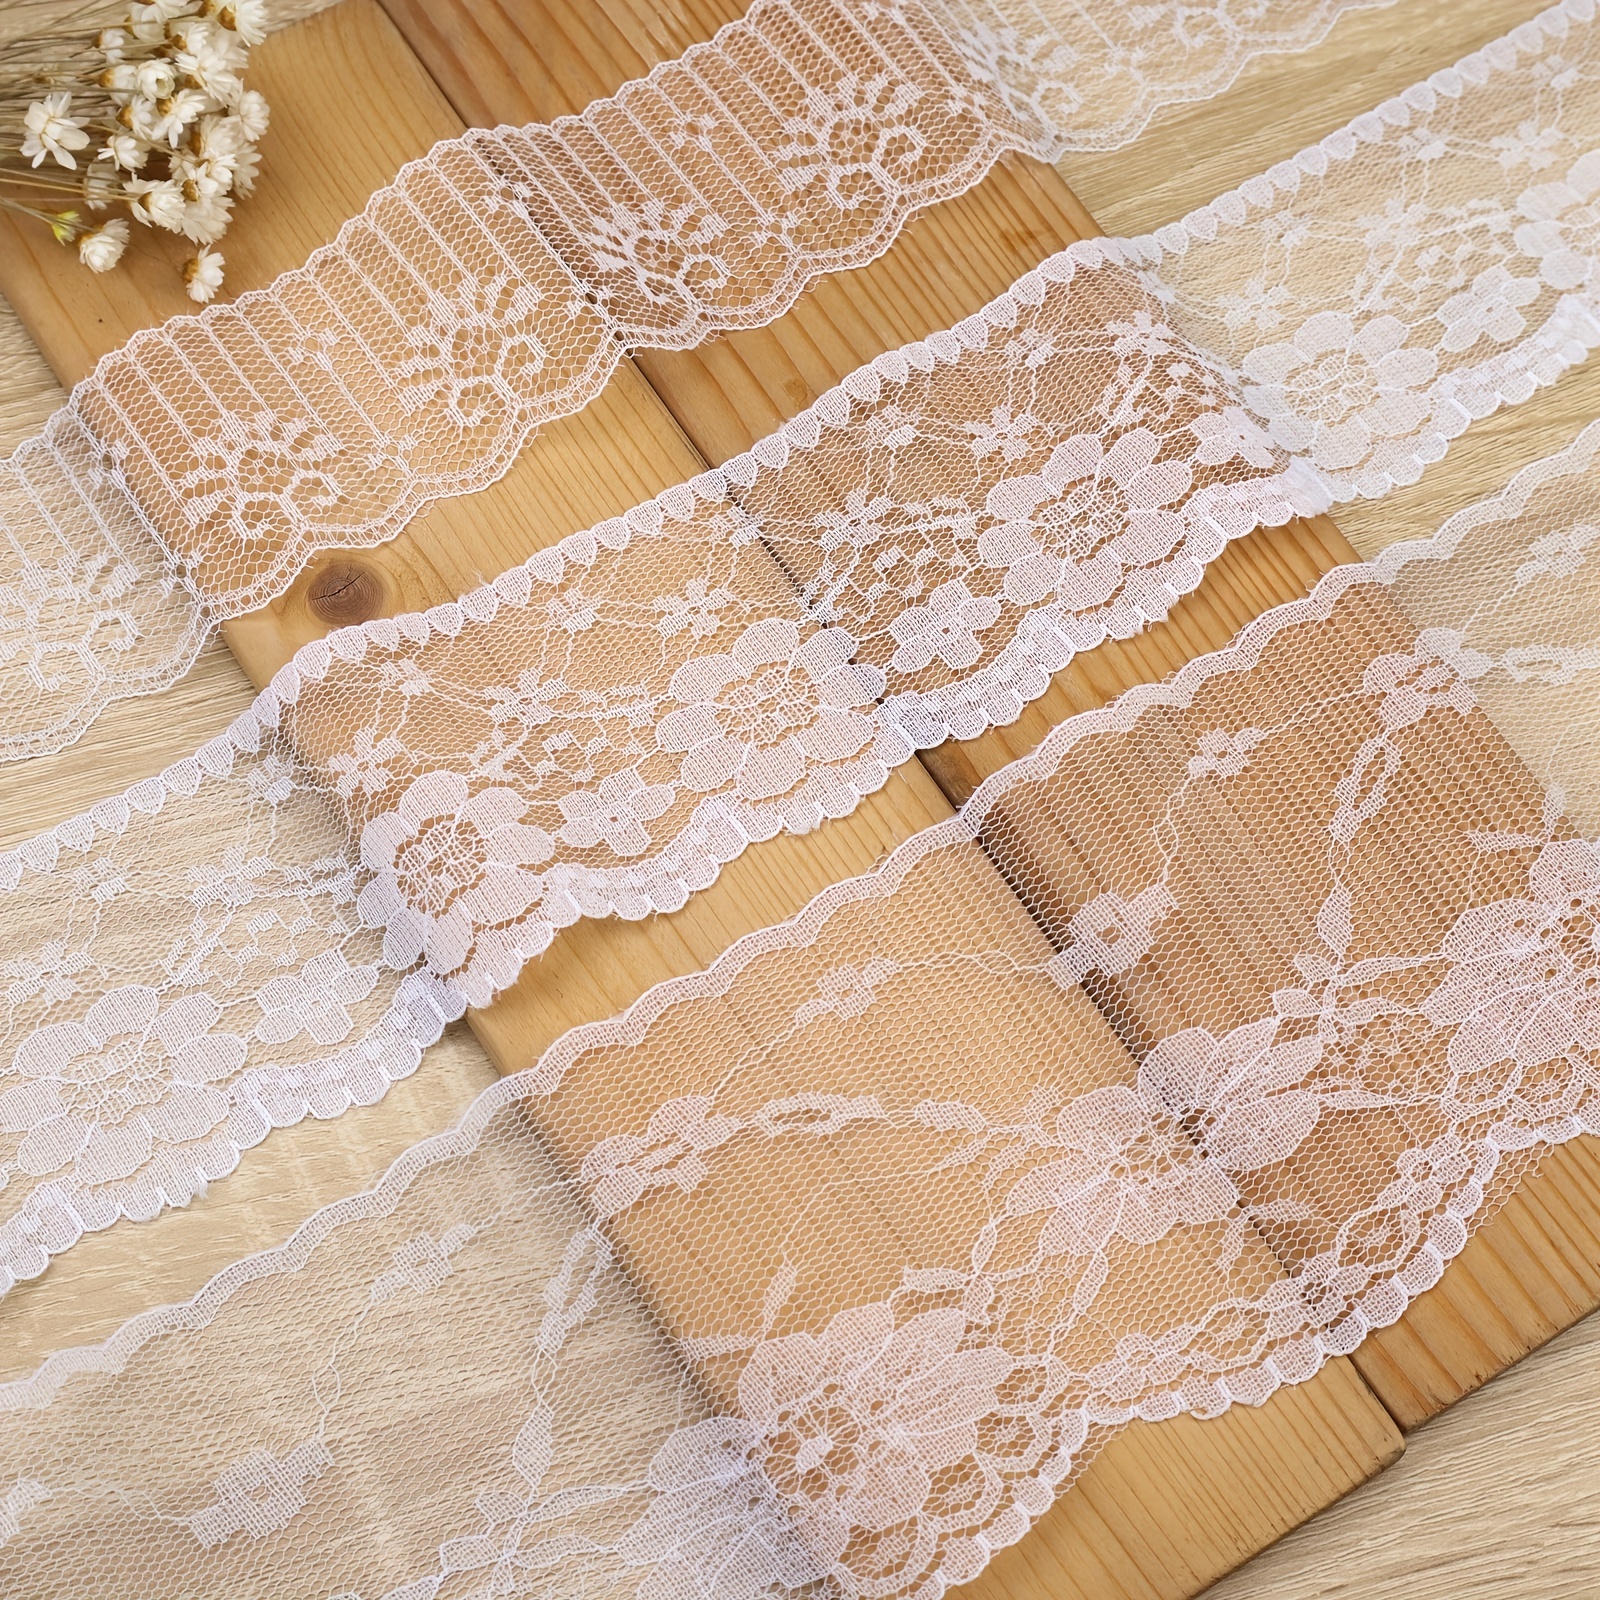 White Cotton Lace Fabric / Eyelet Lace Trim Ribbon With Floral